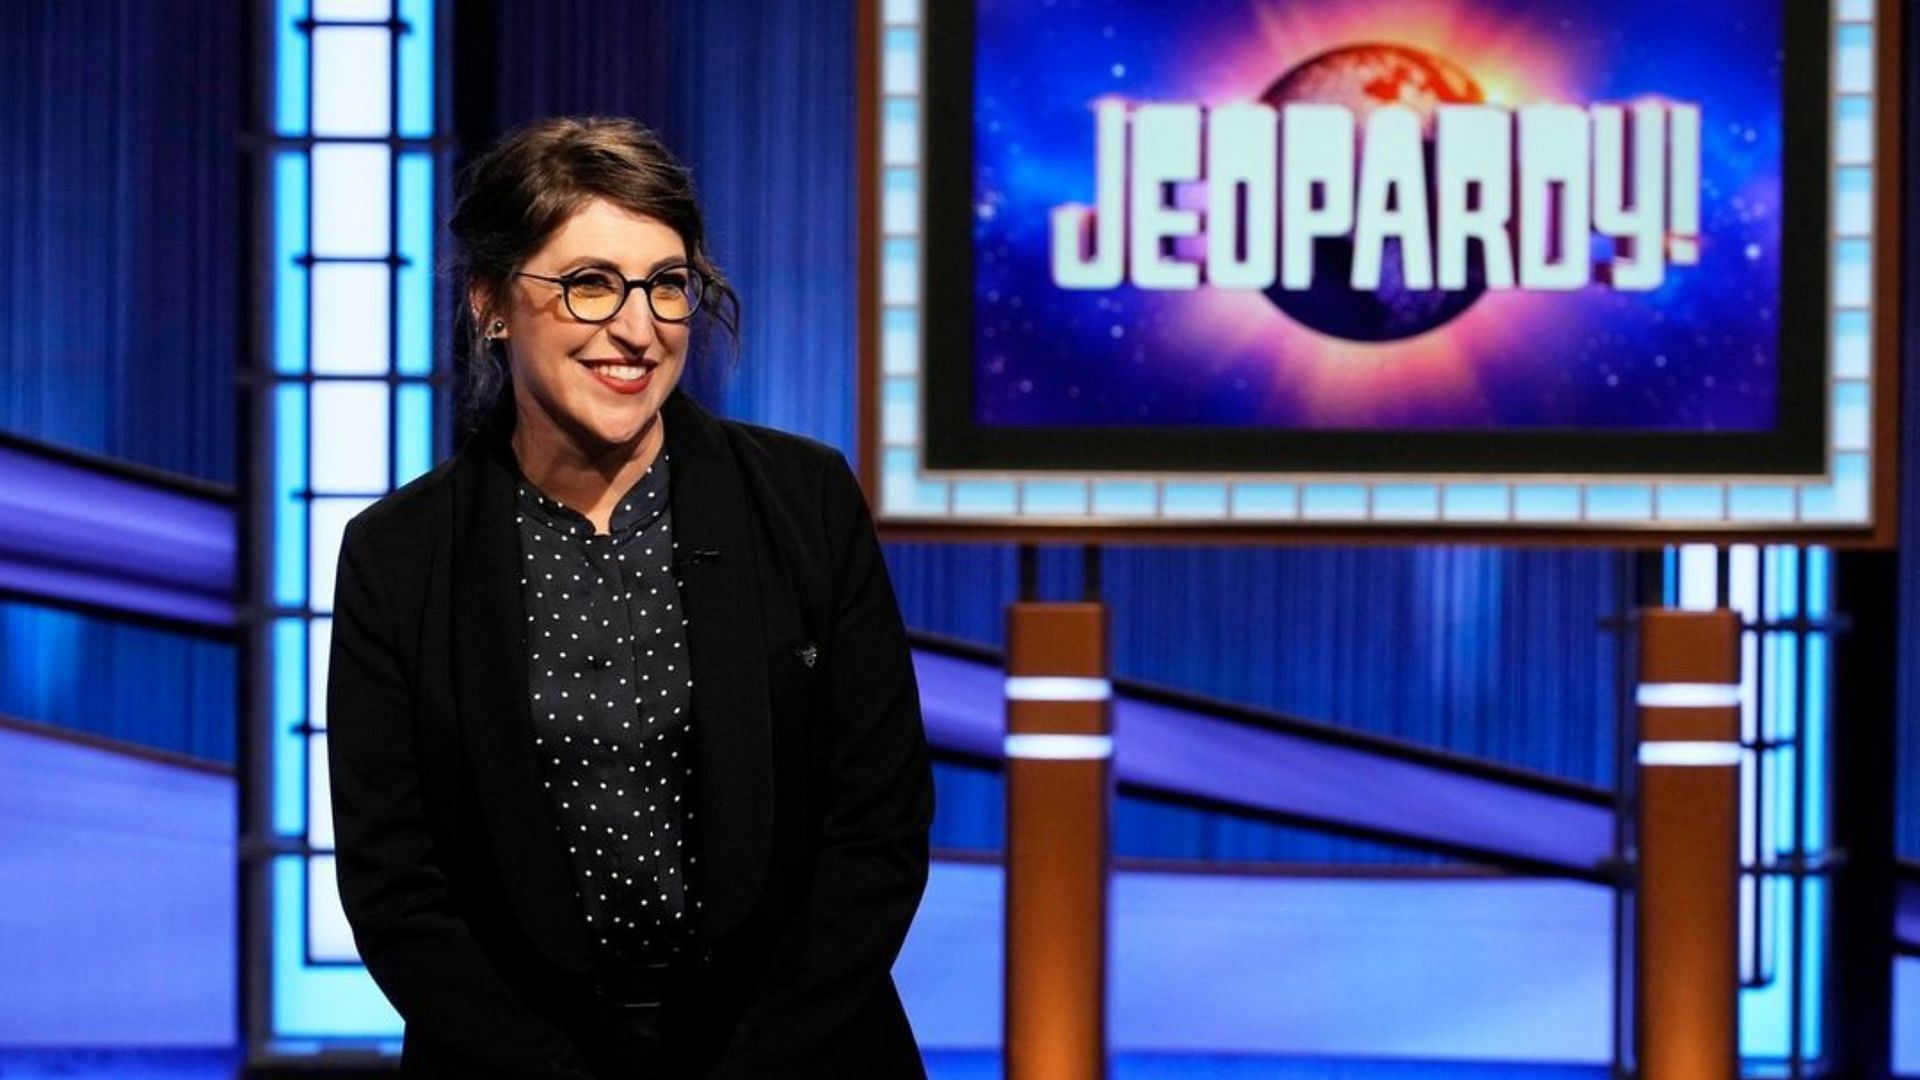 Celebrity Jeopardy! is set to premiere on Sunday, September 25 at 8 pm ET. 